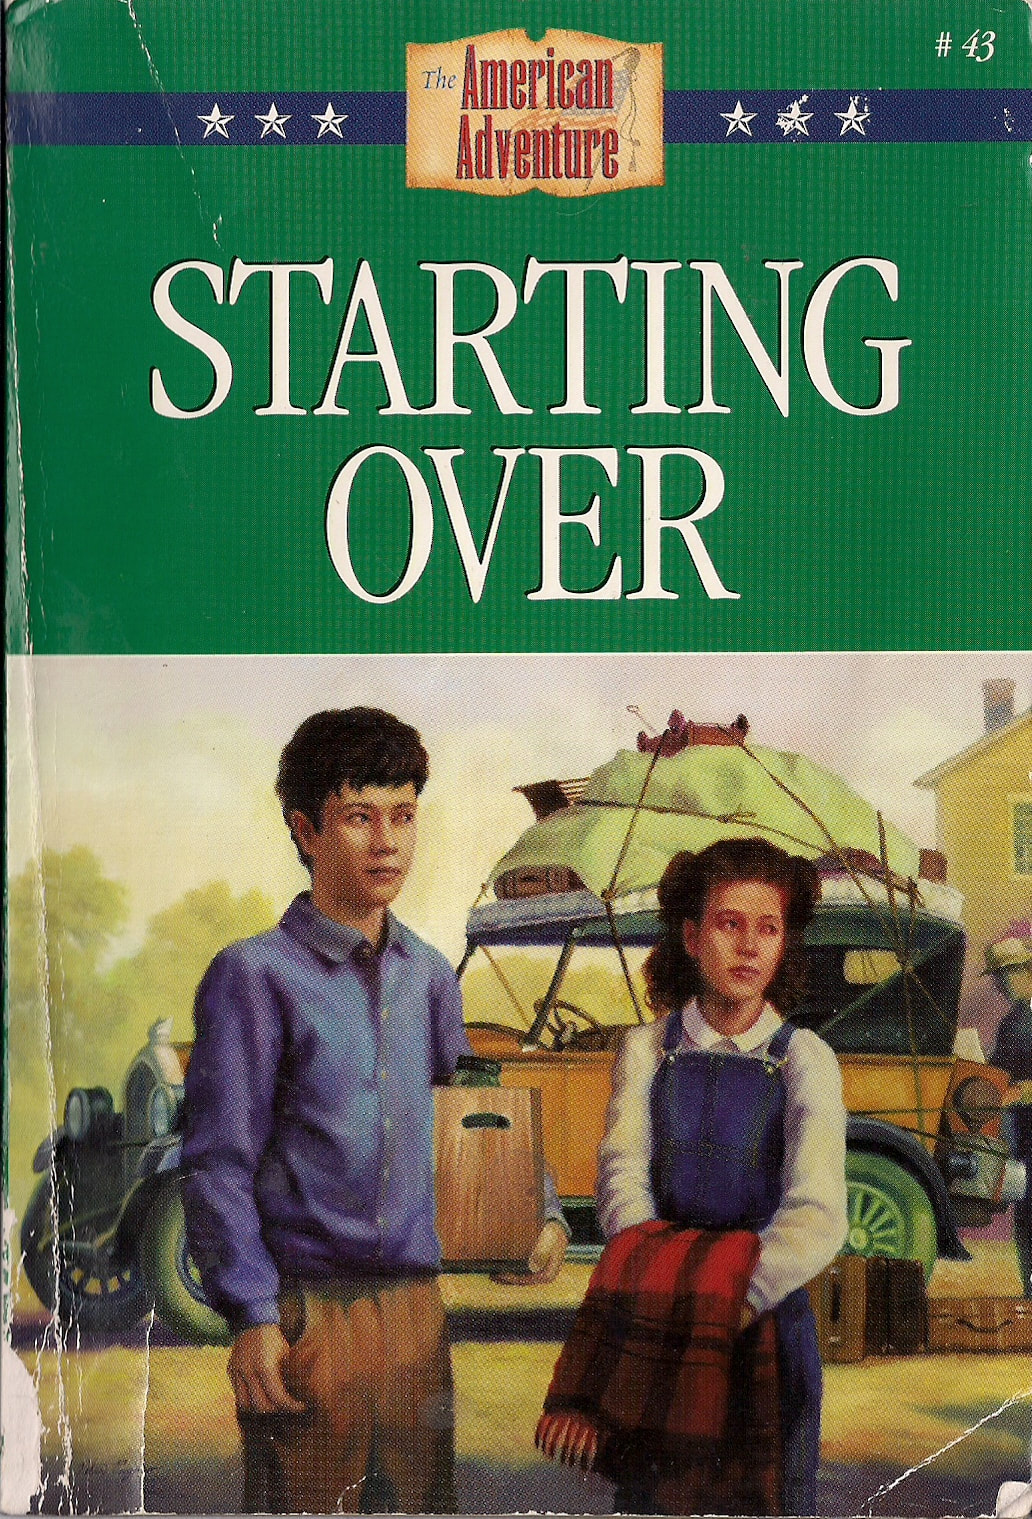 The American Adventure Series (Historical Fiction): Starting Over by Susan Martins Miller